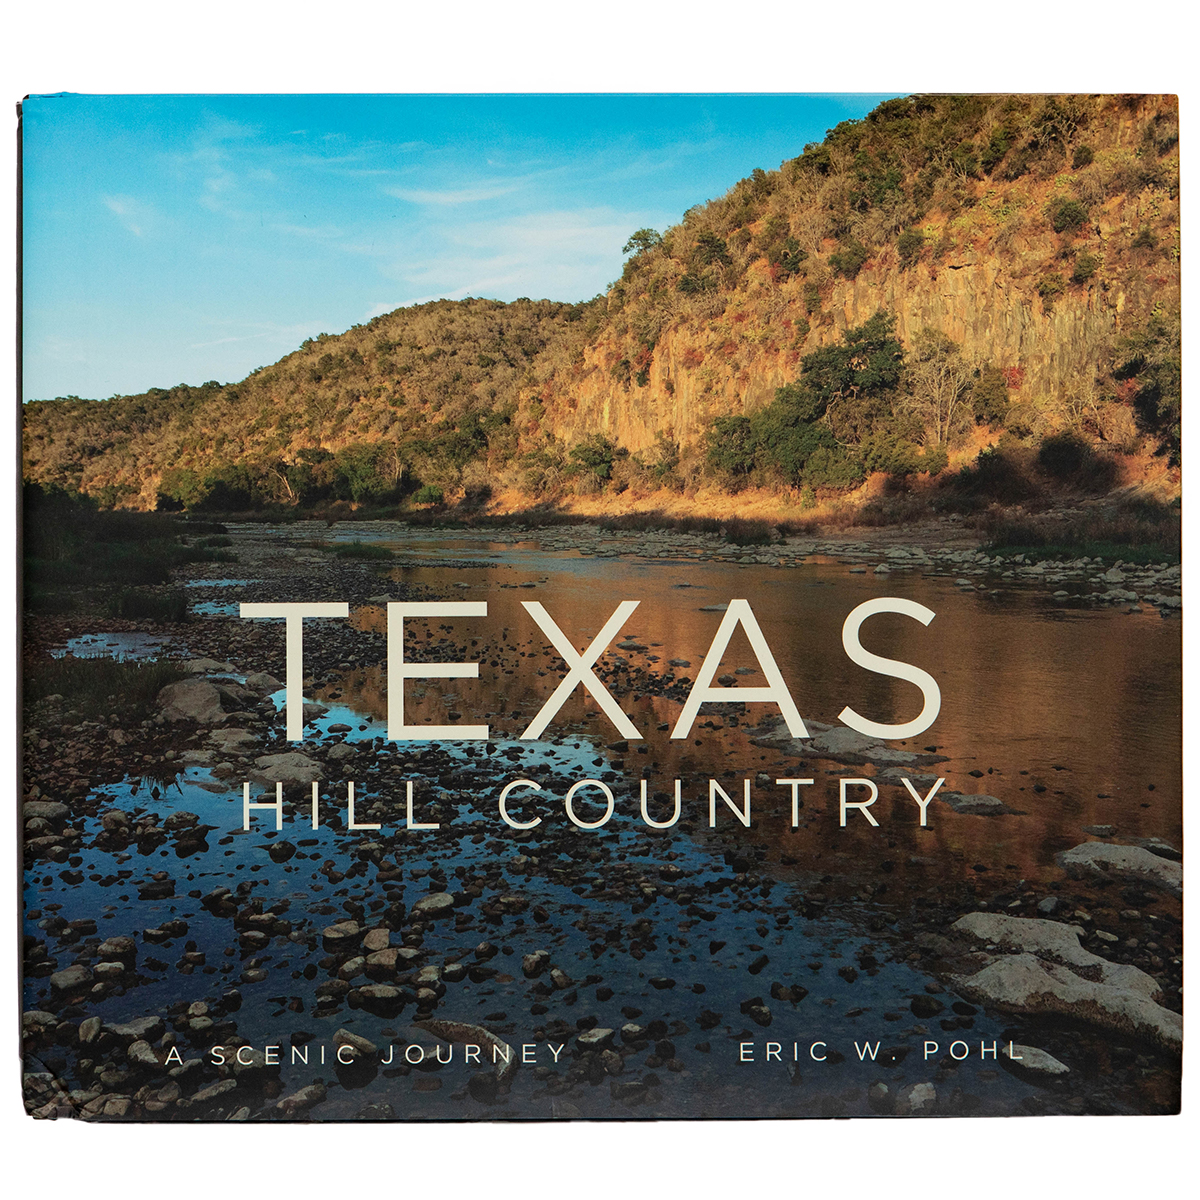 Texas Hill Country: A Scenic Journey